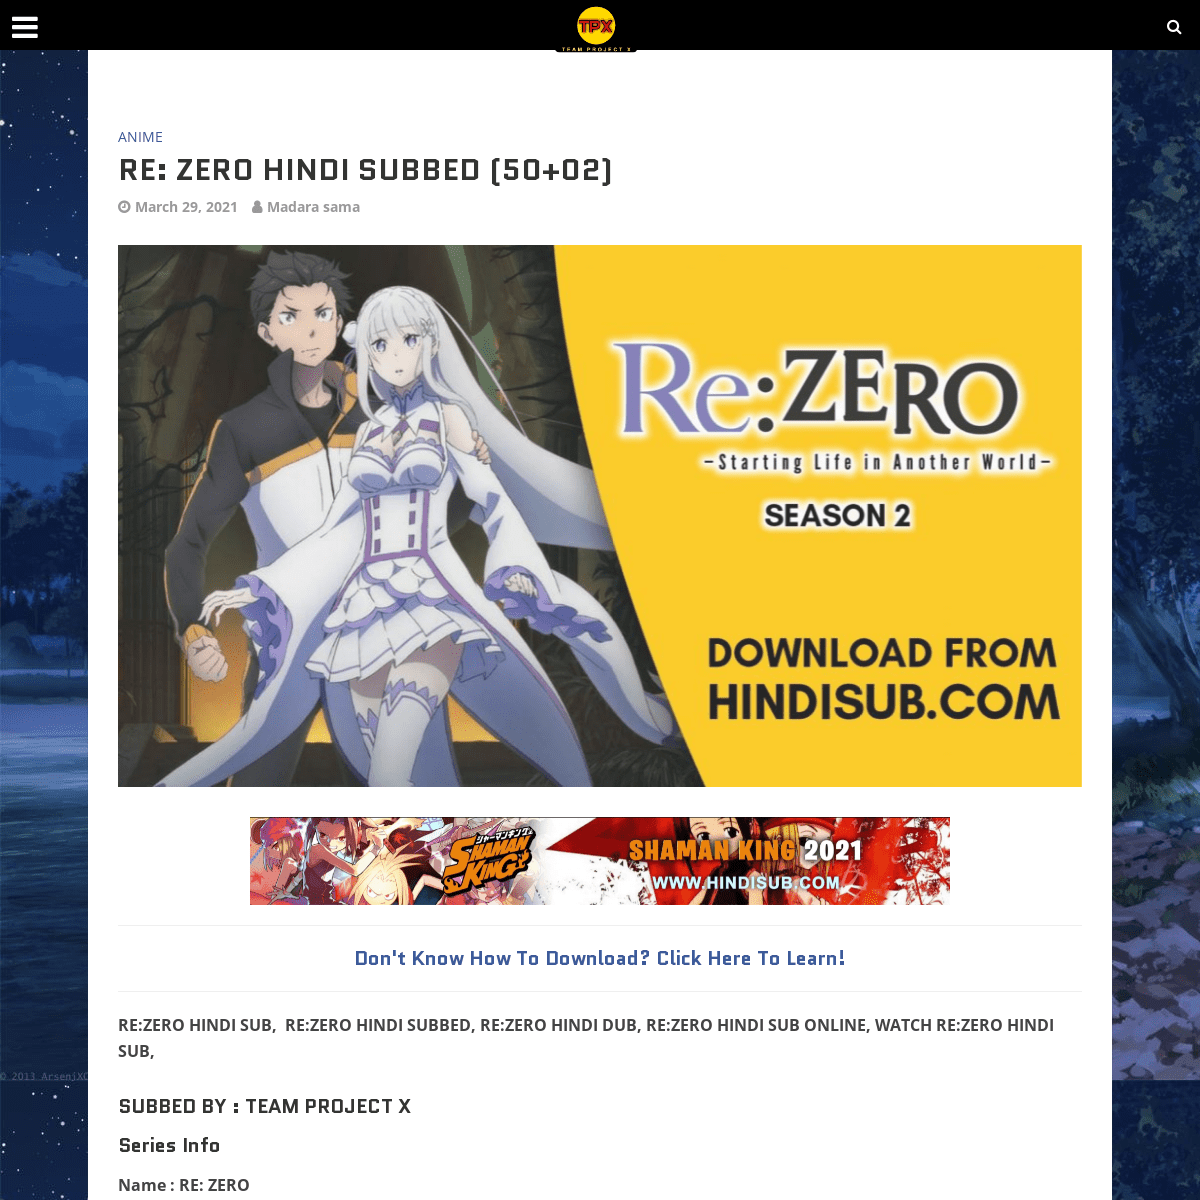 A complete backup of https://hindisub.com/re-zero-hindi-subbed-00-25/